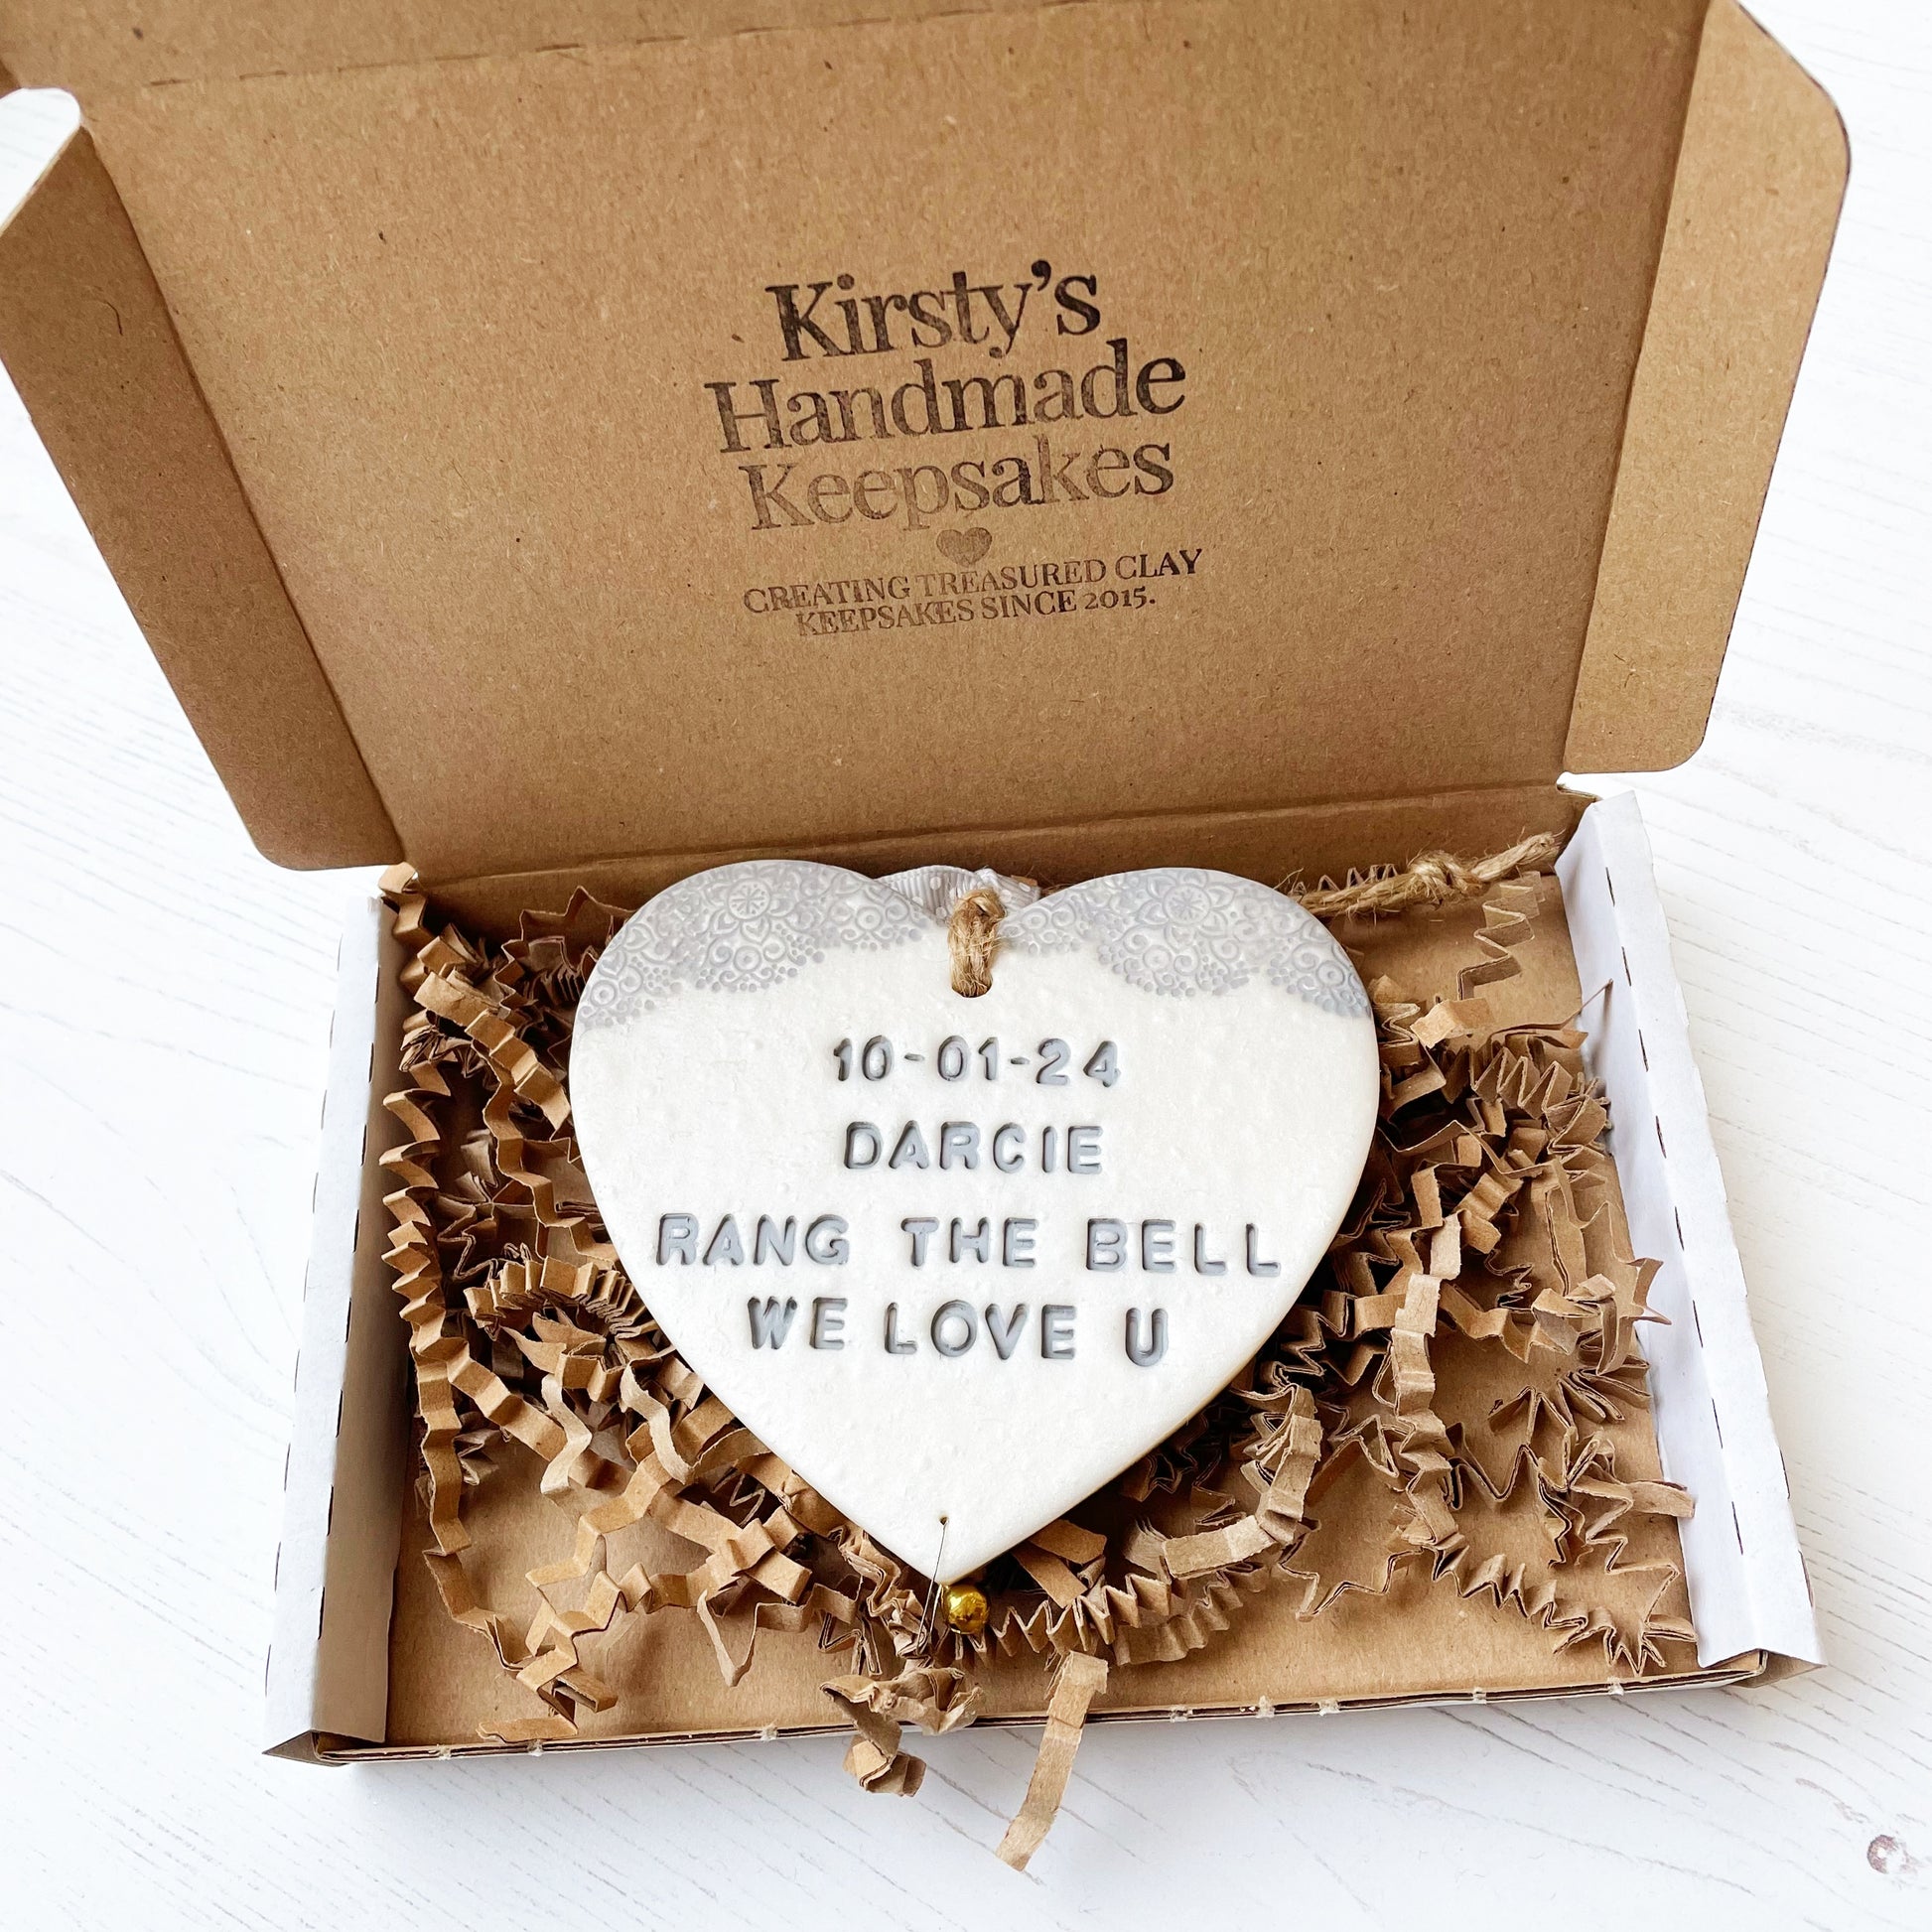 Personalised cancer survivor gift, pearlised white clay hanging heart with a grey lace edge at the top of the heart and a gold bell hanging below, the heart is personalised with 10-01-24 DARCIE RANG THE BELL WE LOVE U. In a white postal box with brown zigzag shredded paper